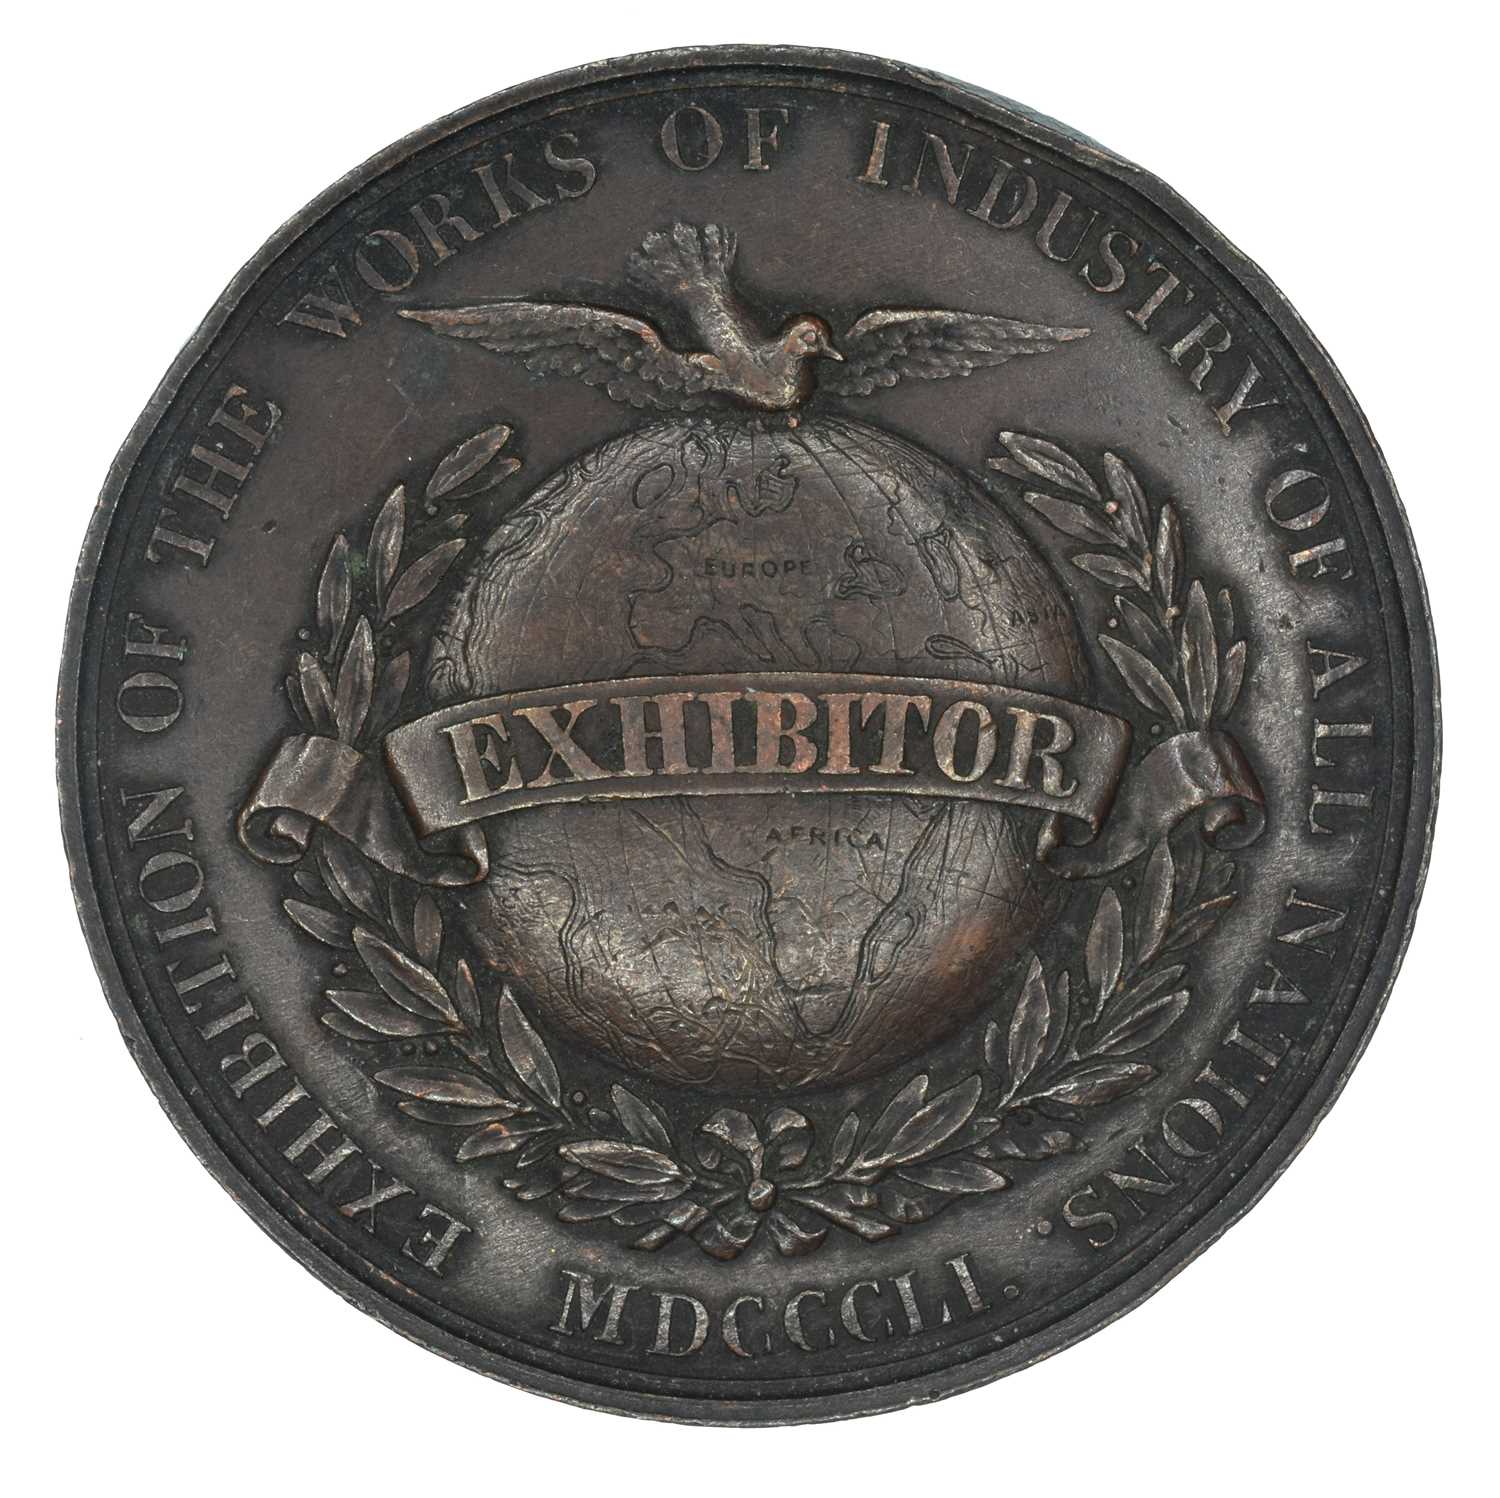 A Victorian bronze Great Exhibition medal. - Image 2 of 2